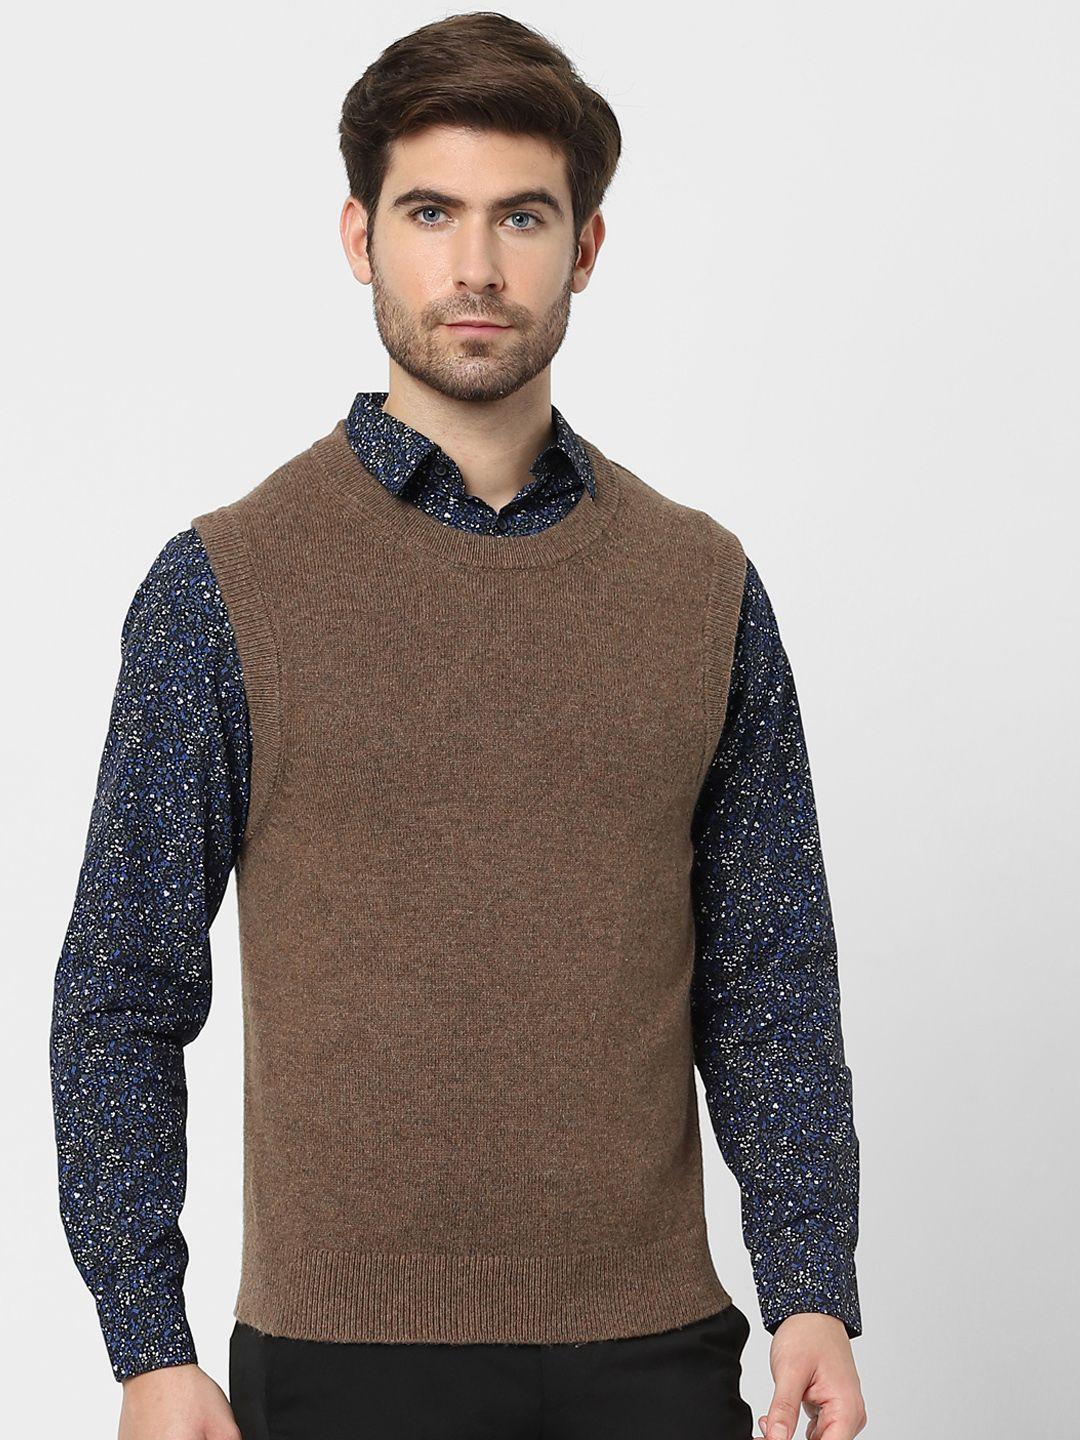 selected men brown solid knitted pullover sweater